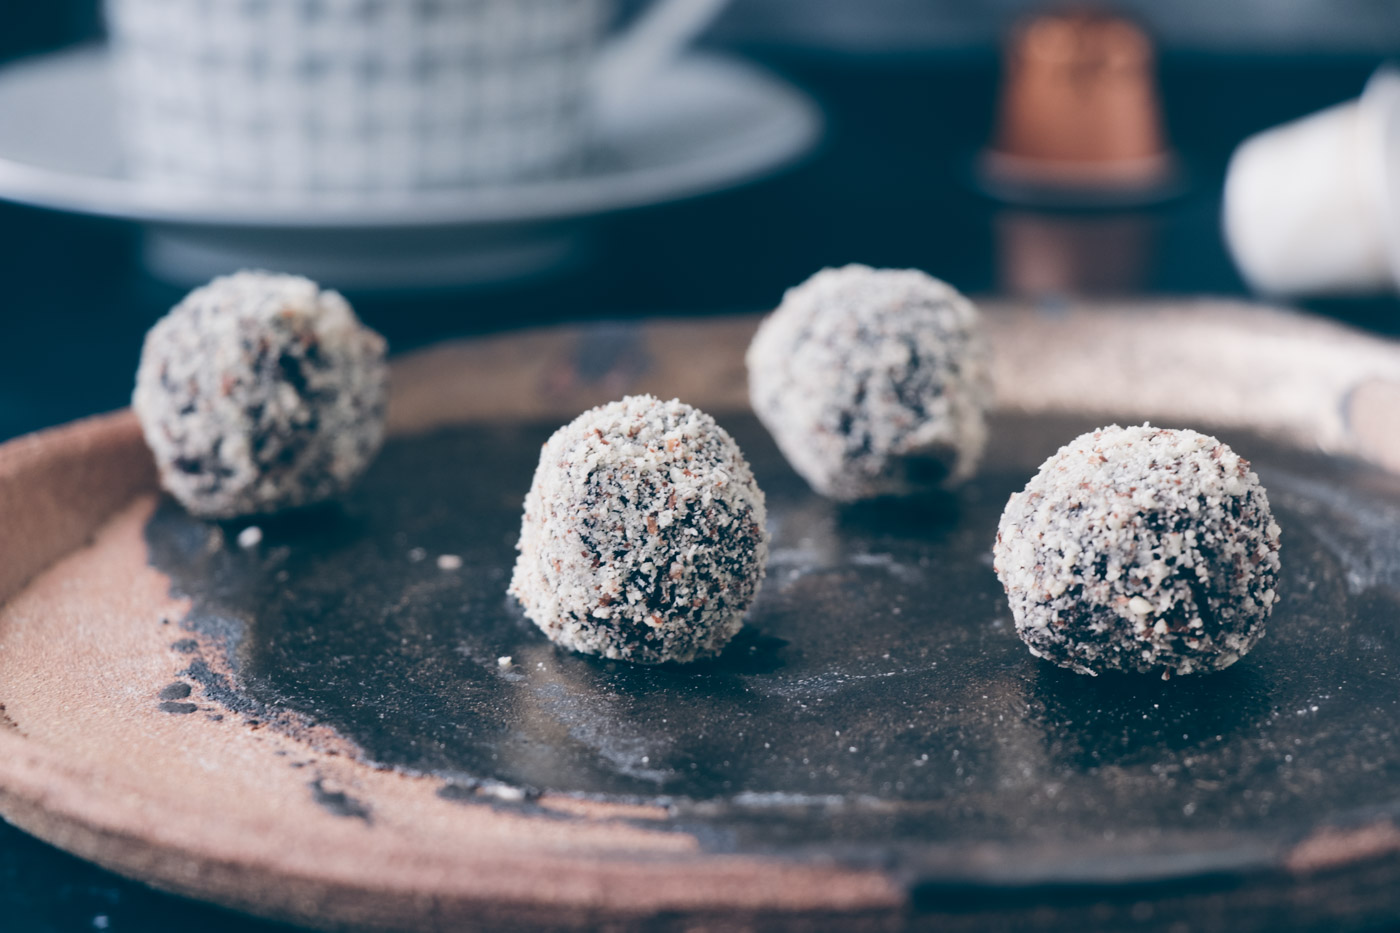 Dark Chocolate Rum Balls These Chocolate Energy Balls are the perfect afternoon pick-me-up